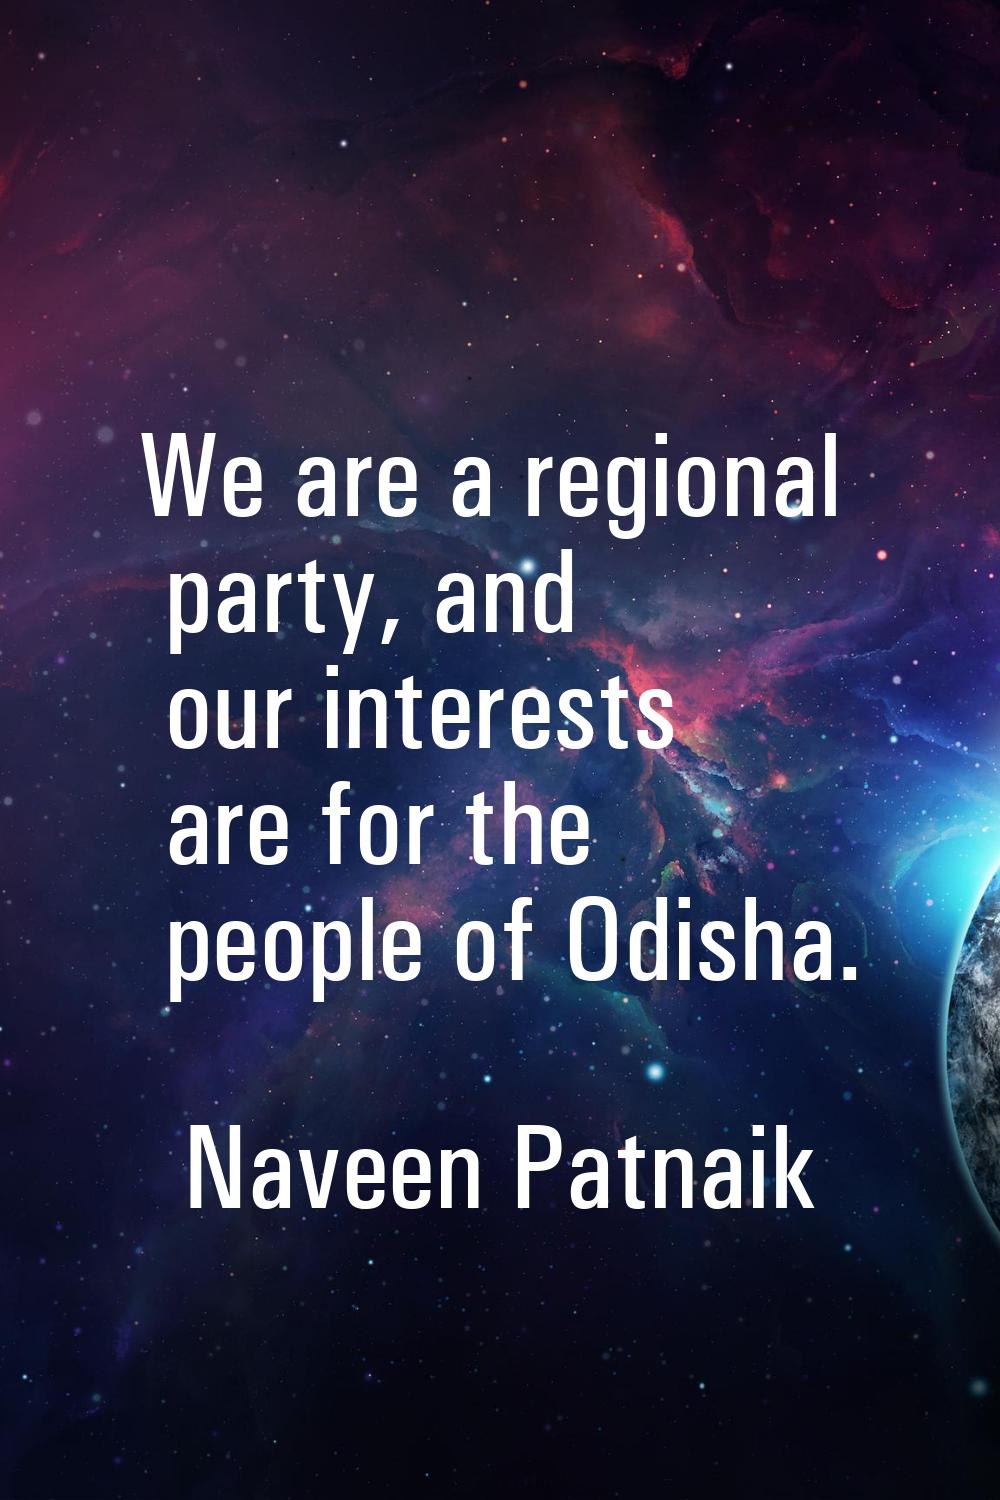 We are a regional party, and our interests are for the people of Odisha.